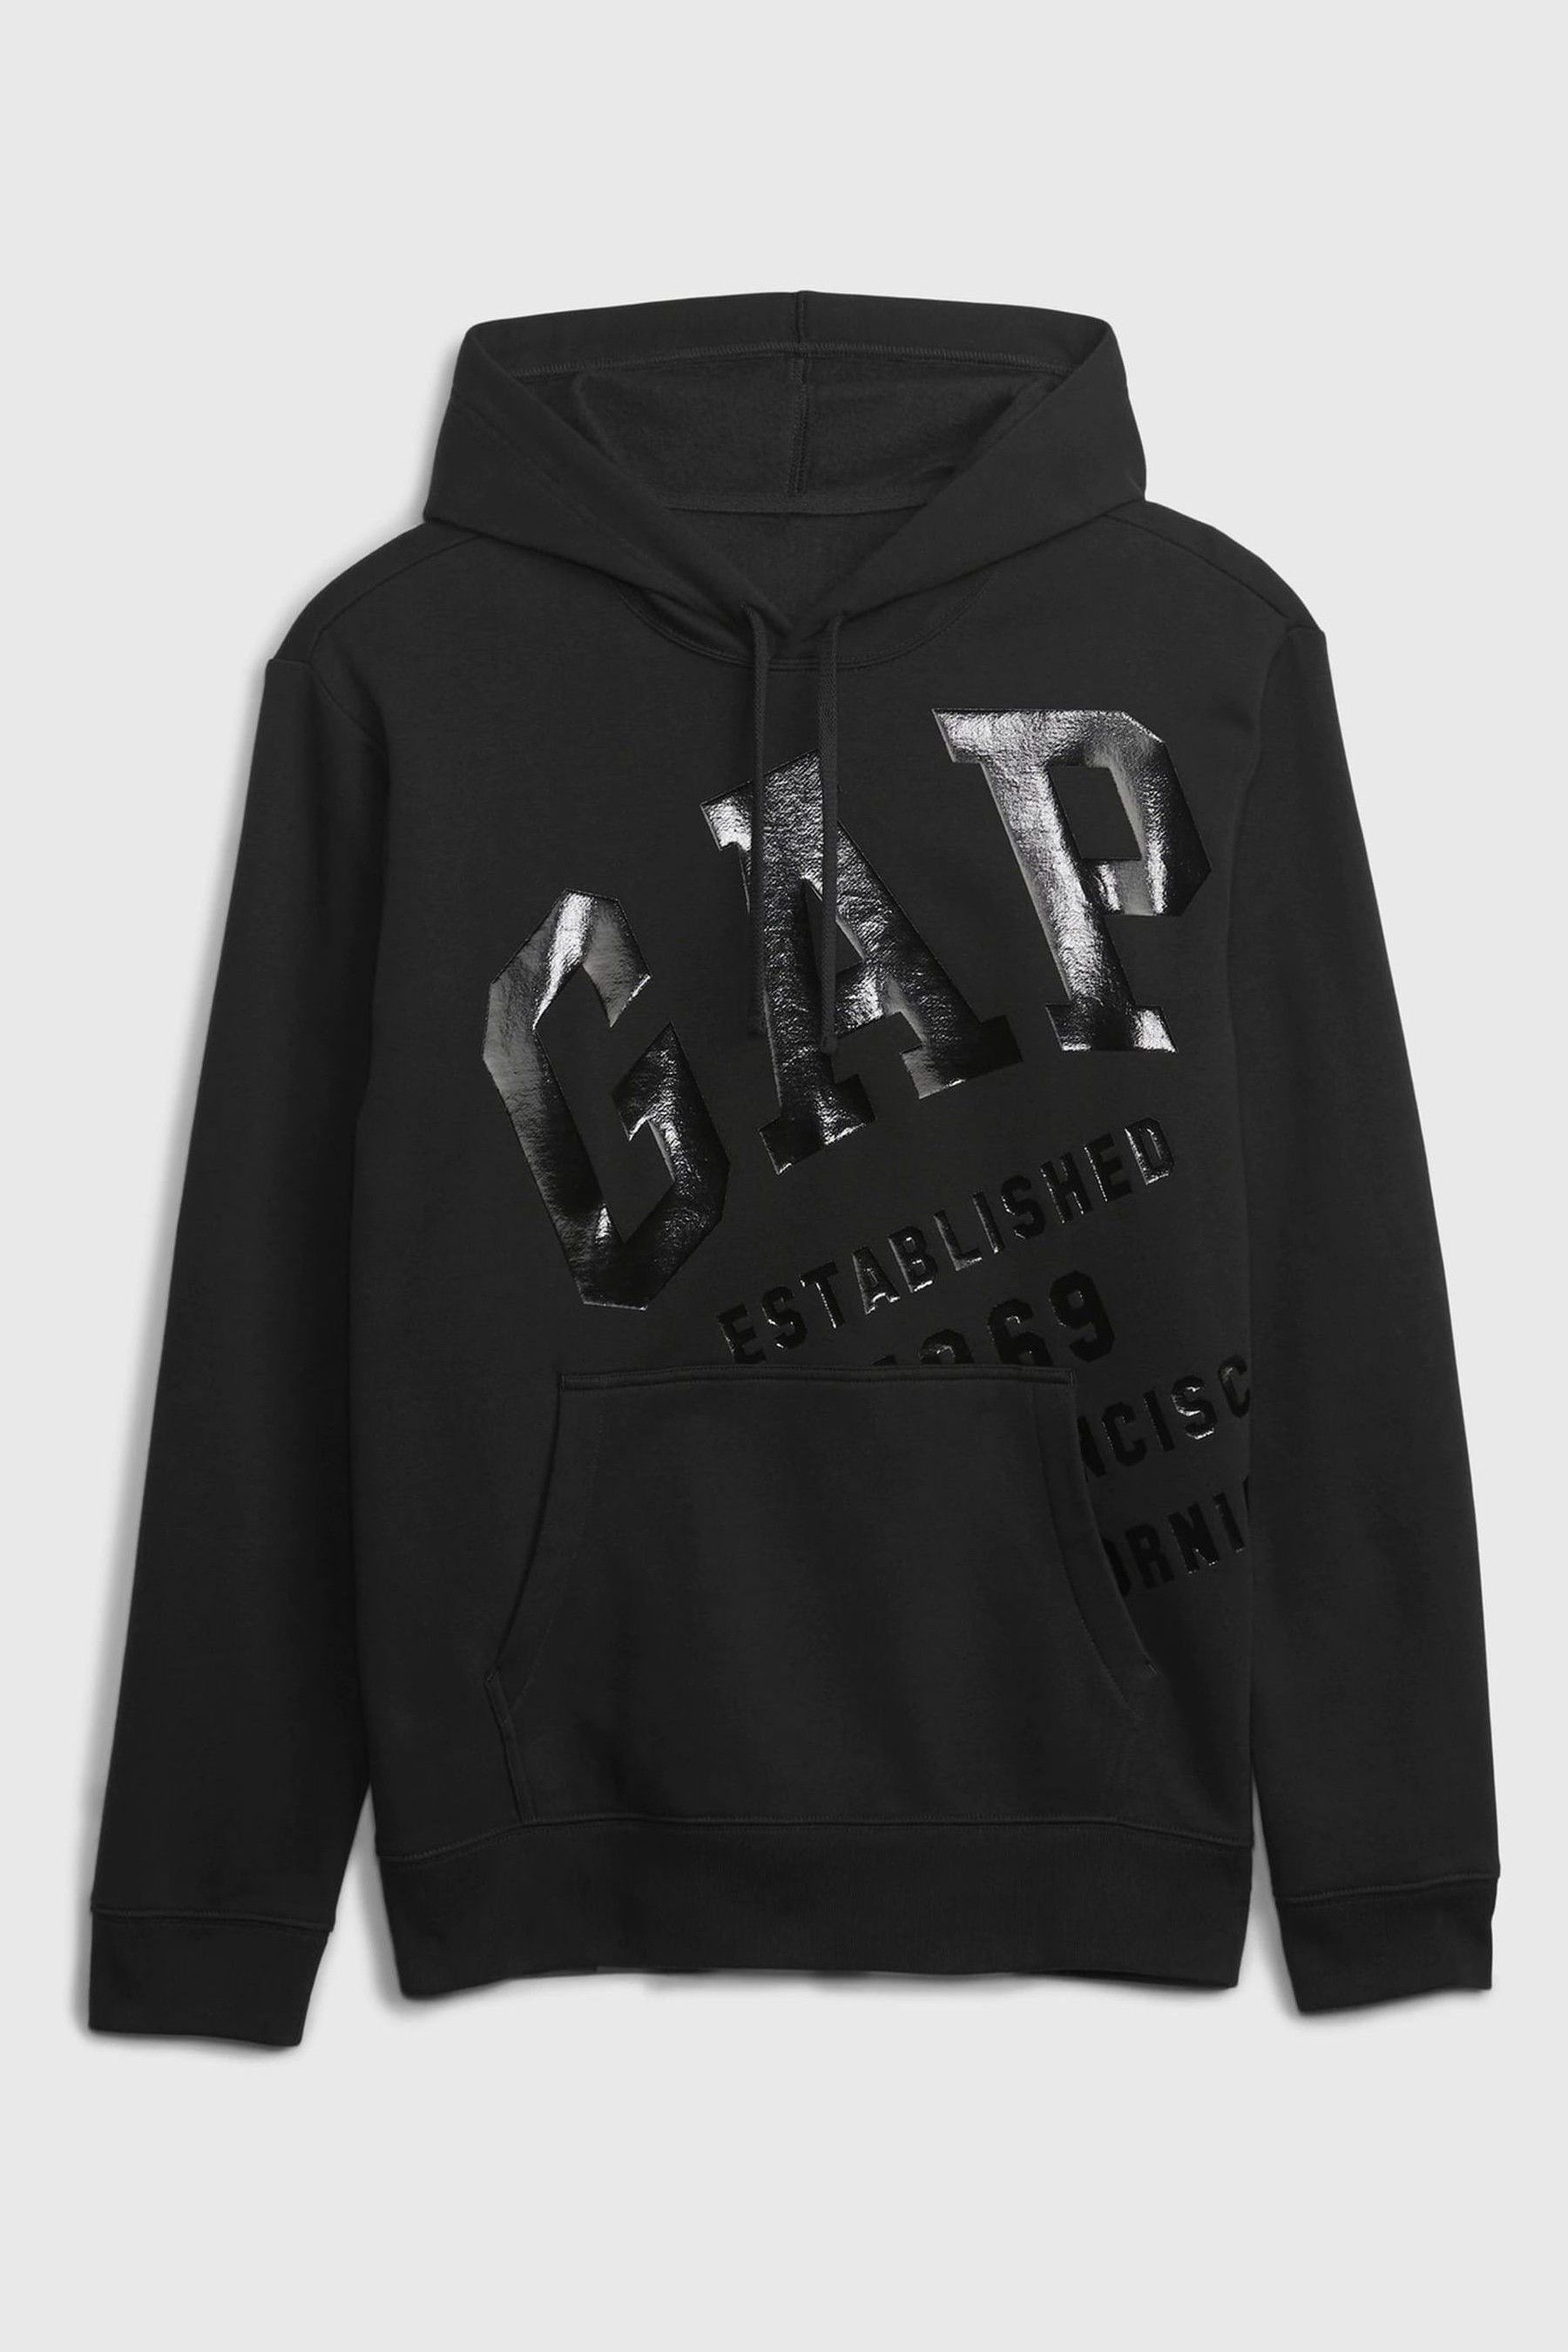 Buy Gap Graphic Logo Hoodie from the Gap online shop